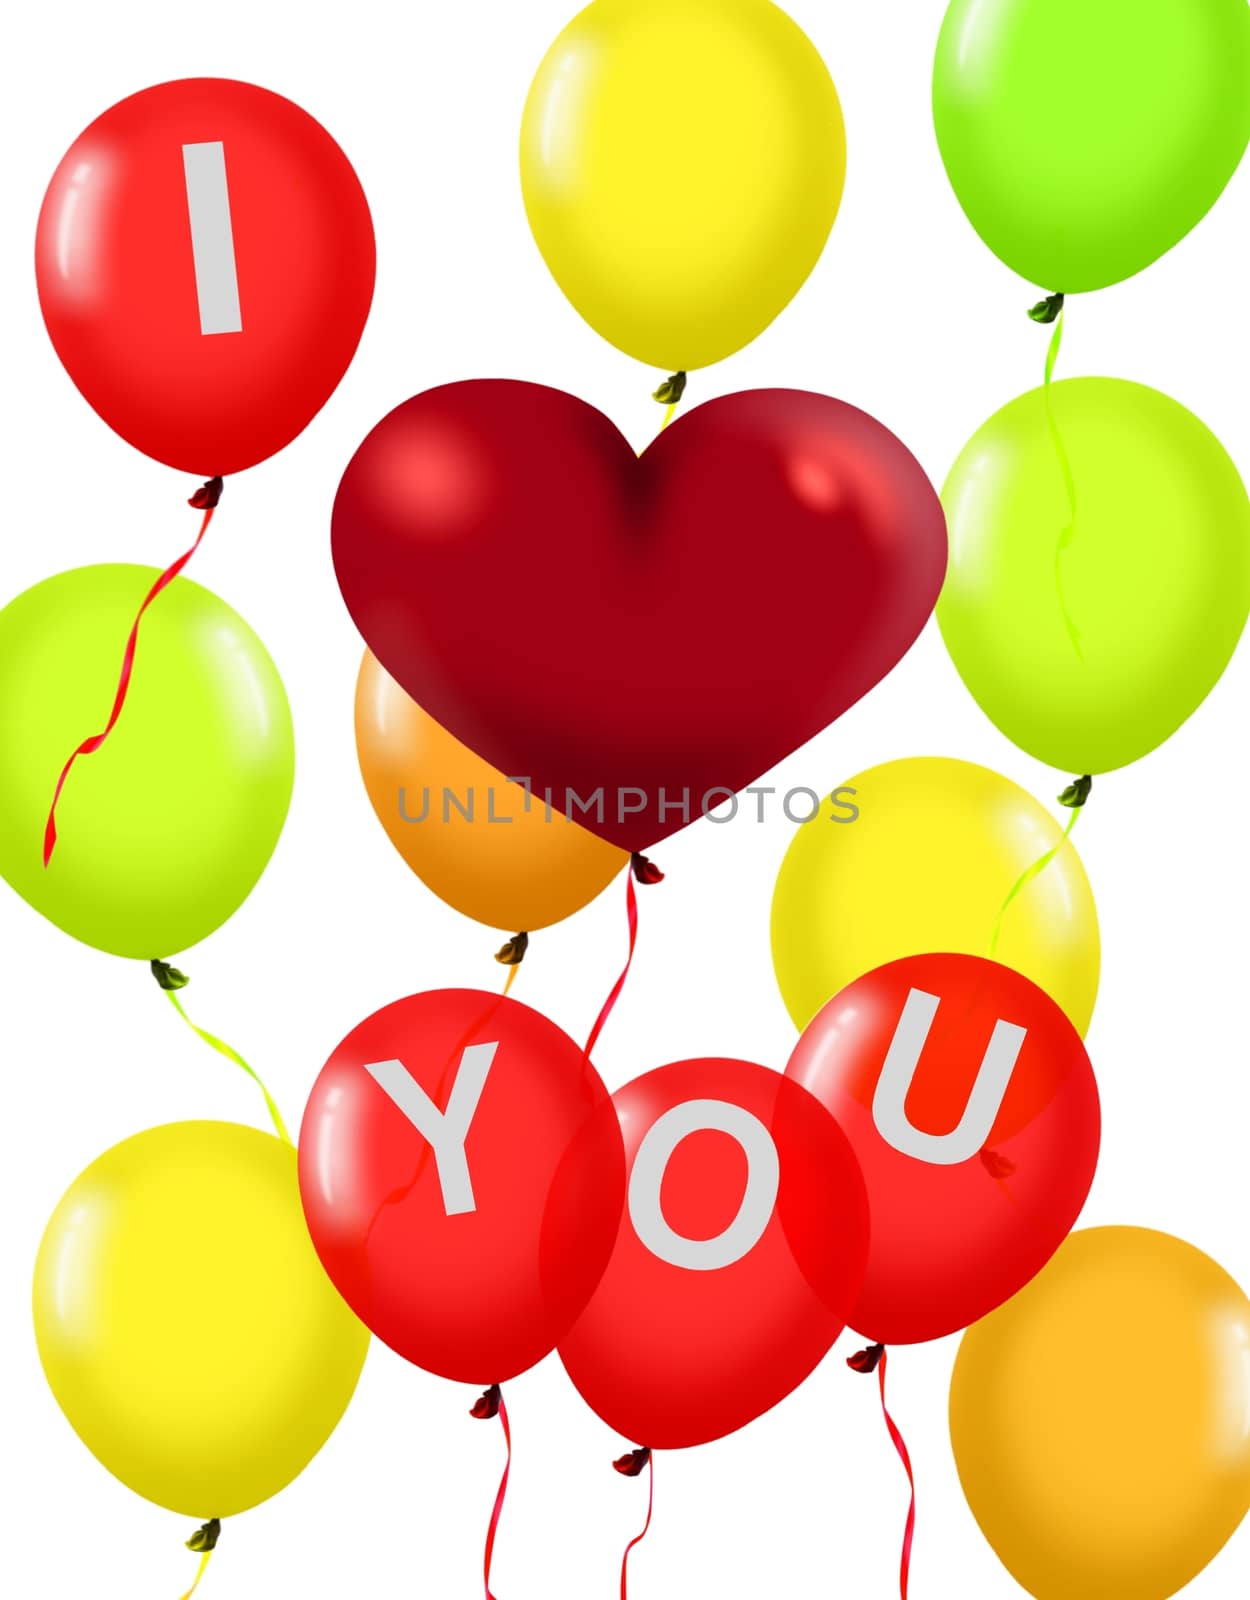 Balloons with a red love shape symbol